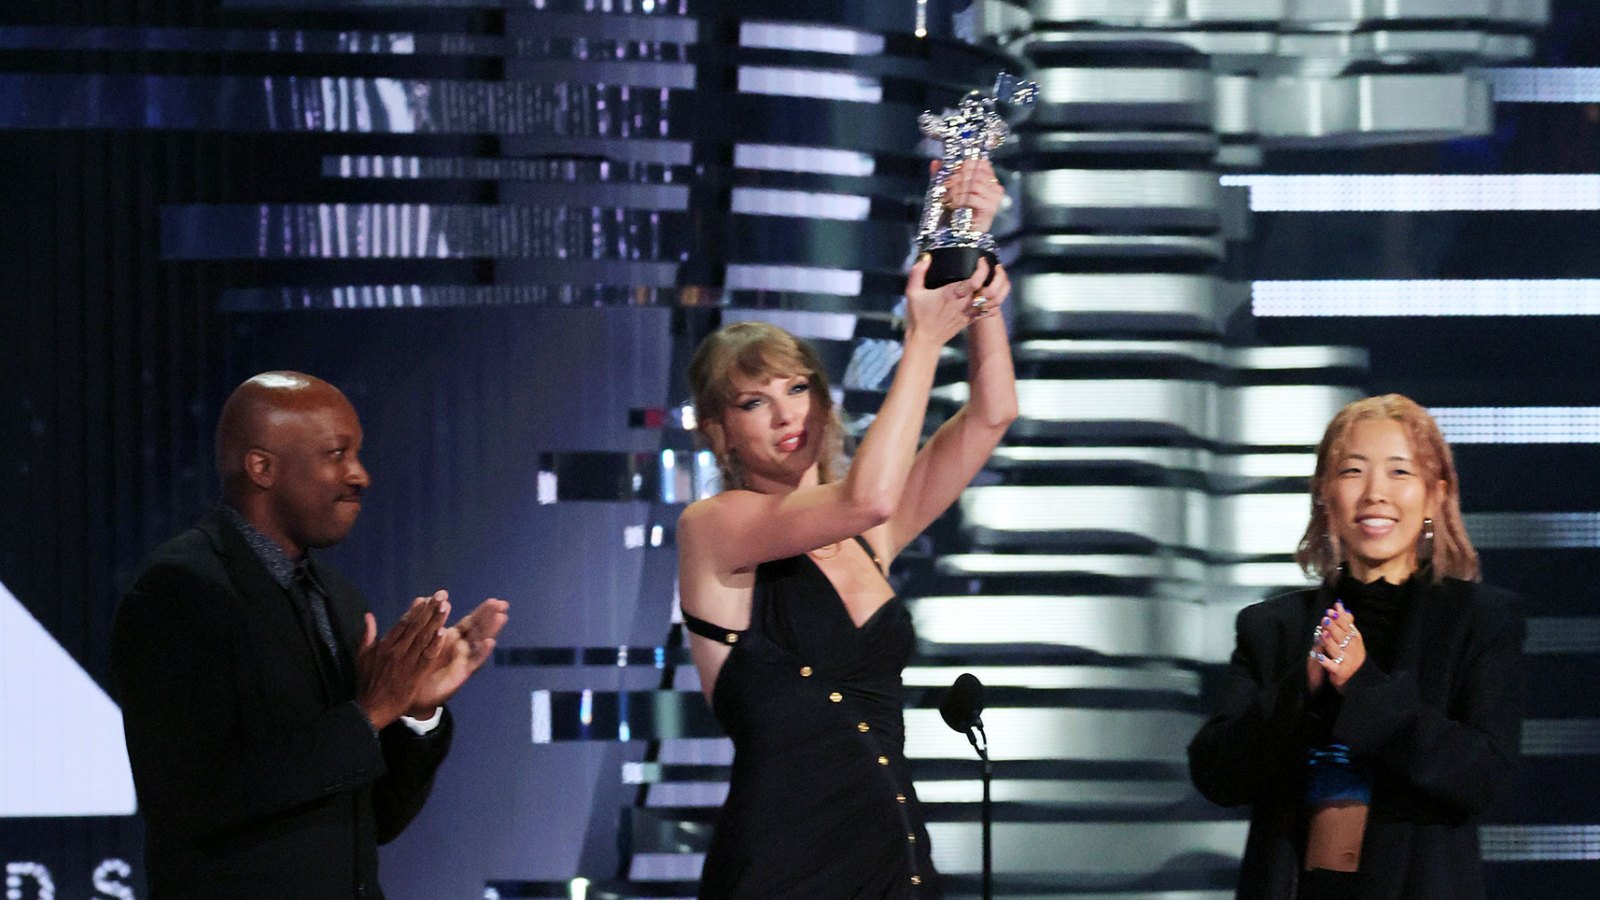 Taylor Swift Makes MTV Video Music Awards History With 4th Video of the Year Win